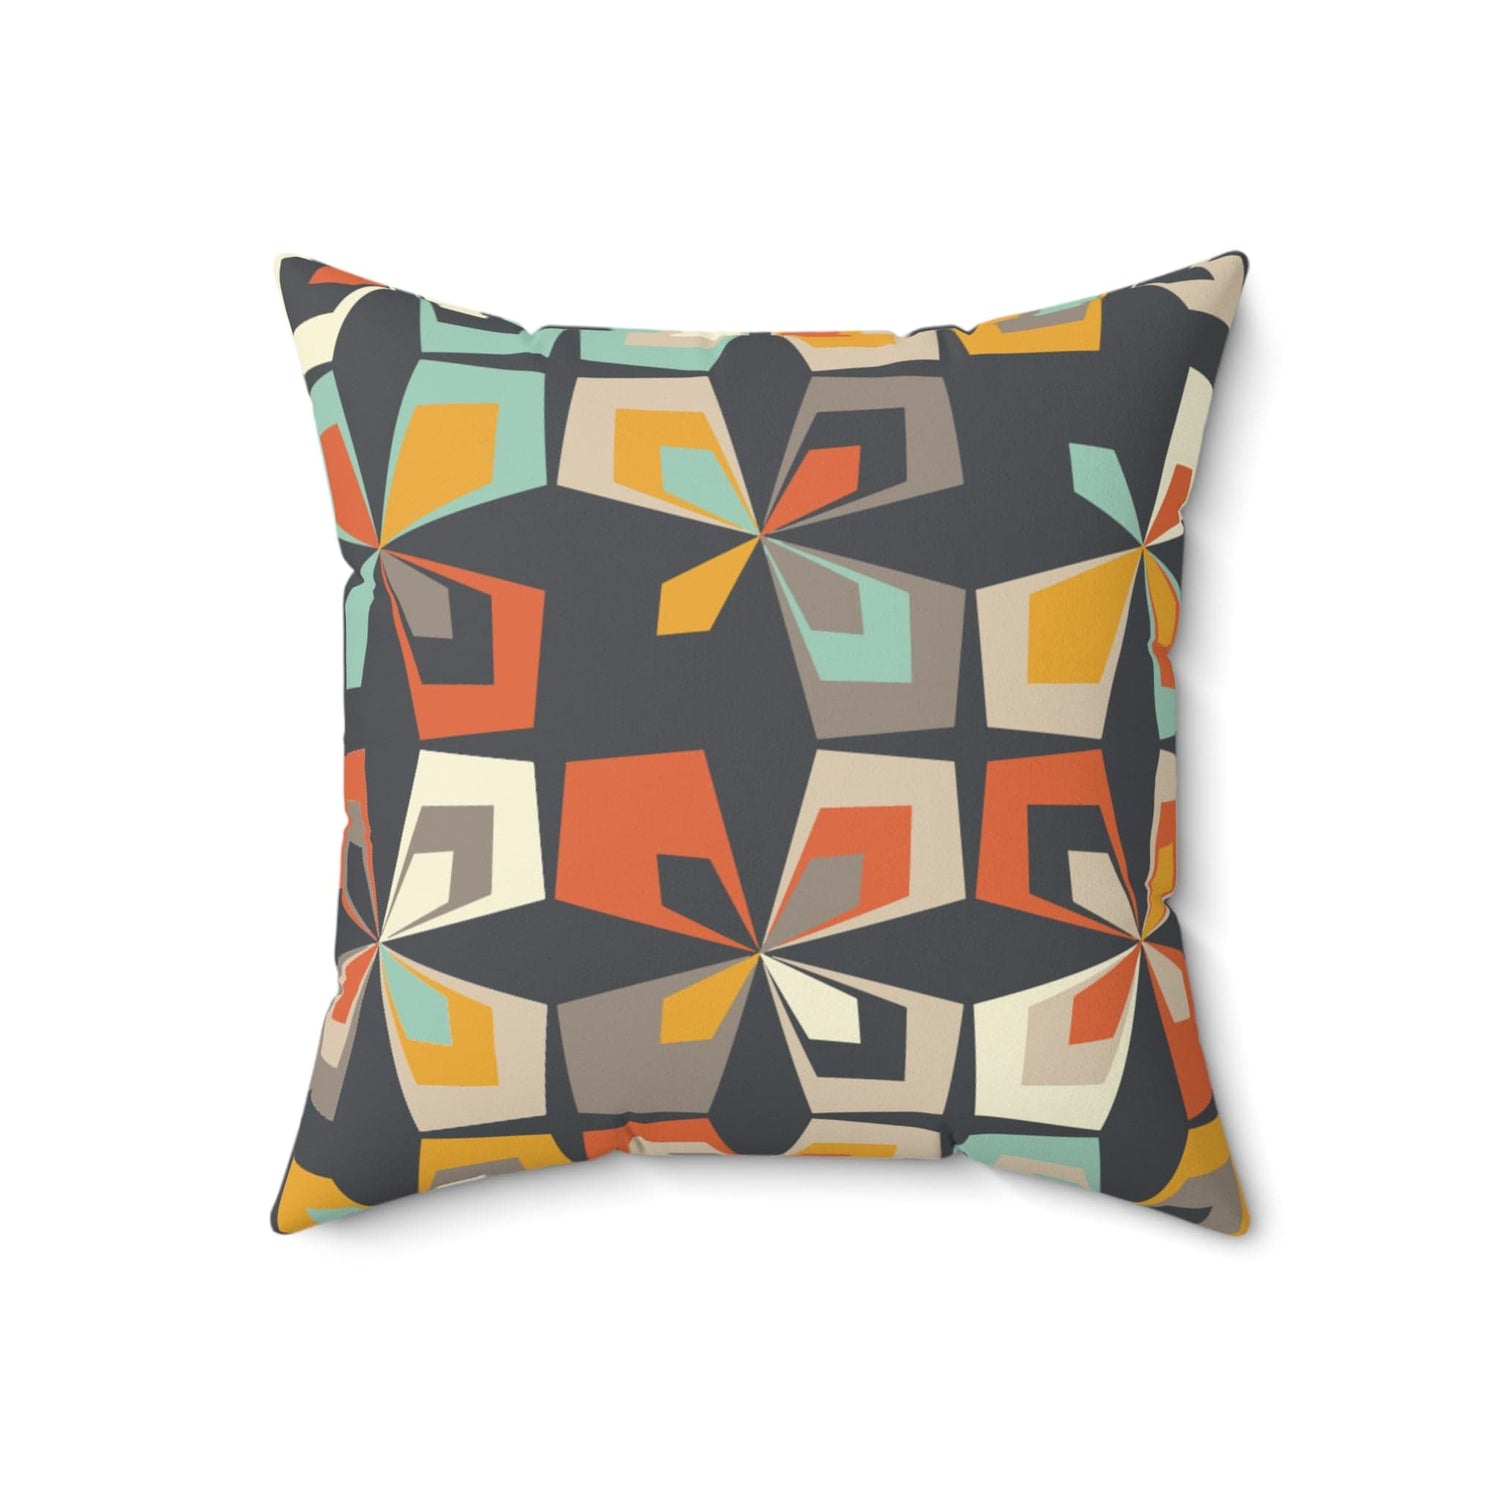 Kate McEnroe New York Mid Century Modern Geometric Throw Pillow with Insert, Retro Vintage 60s Abstract Floral Living Room, Bedroom DecorThrow Pillows33432573668720474081